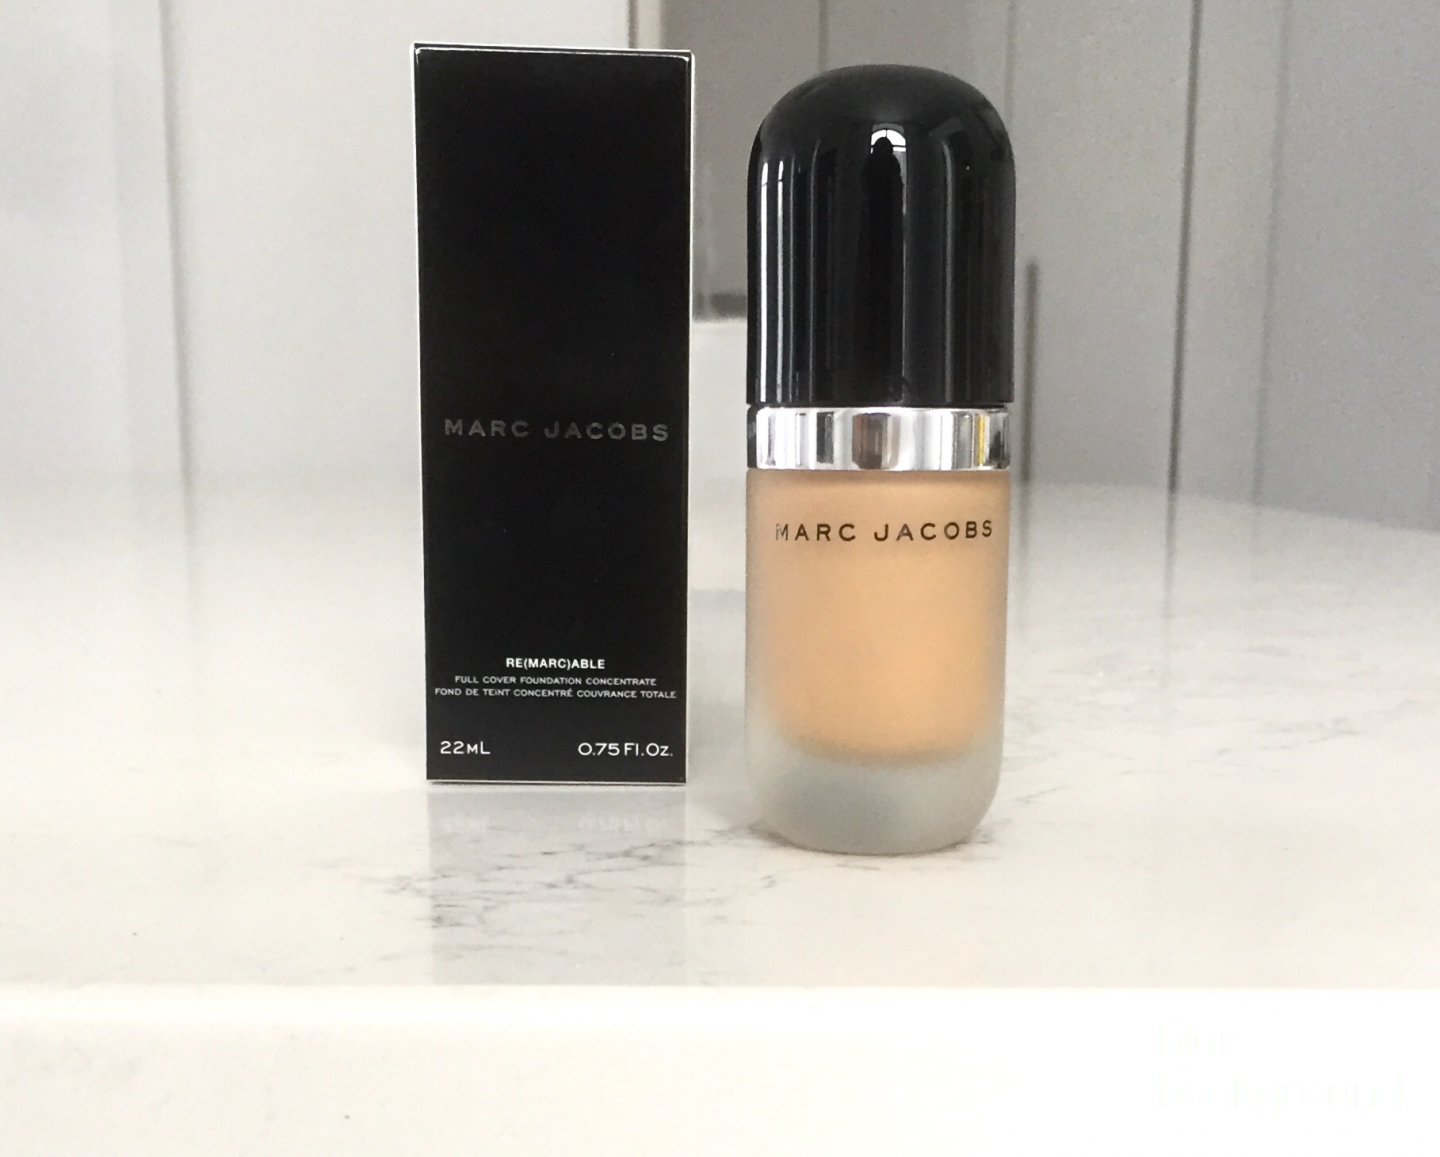 Marc Jacobs Re(marc)able Foundation